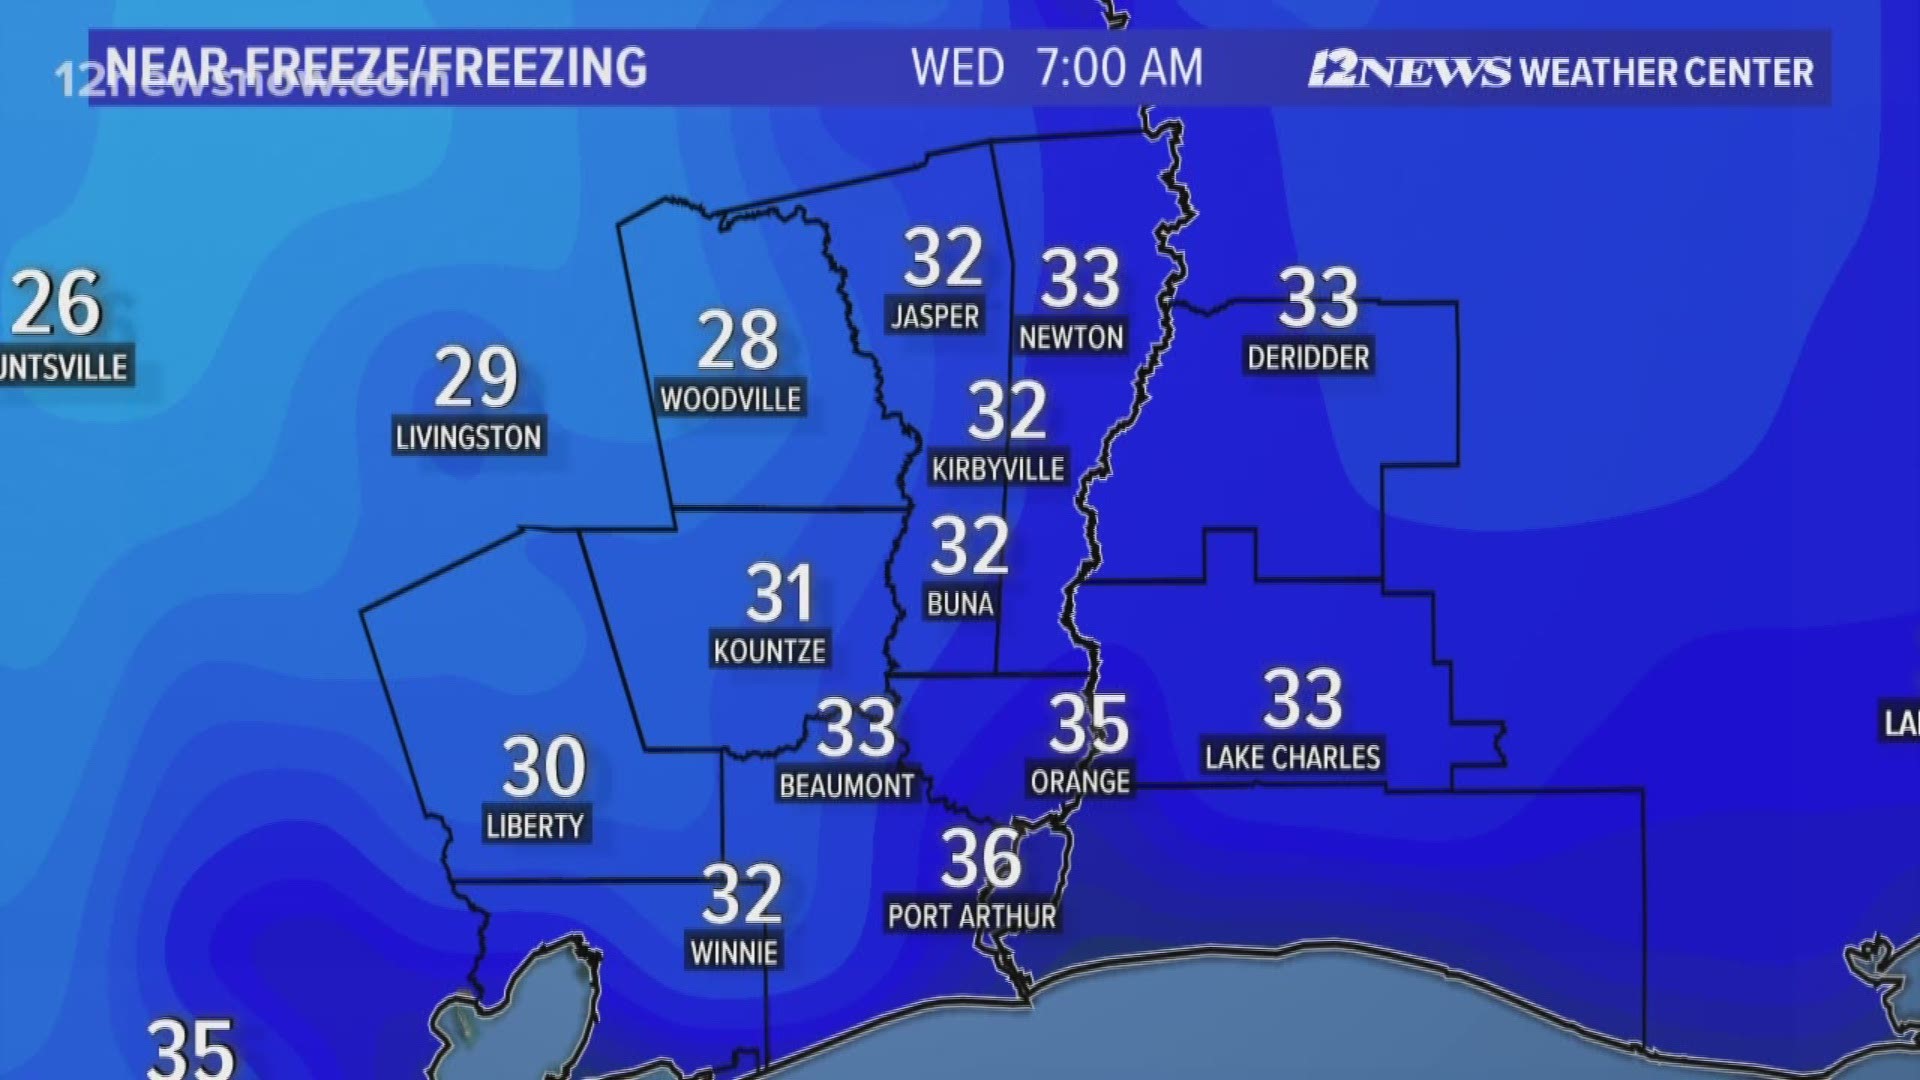 Cold temperatures expected Wednesday night and Thursday morning